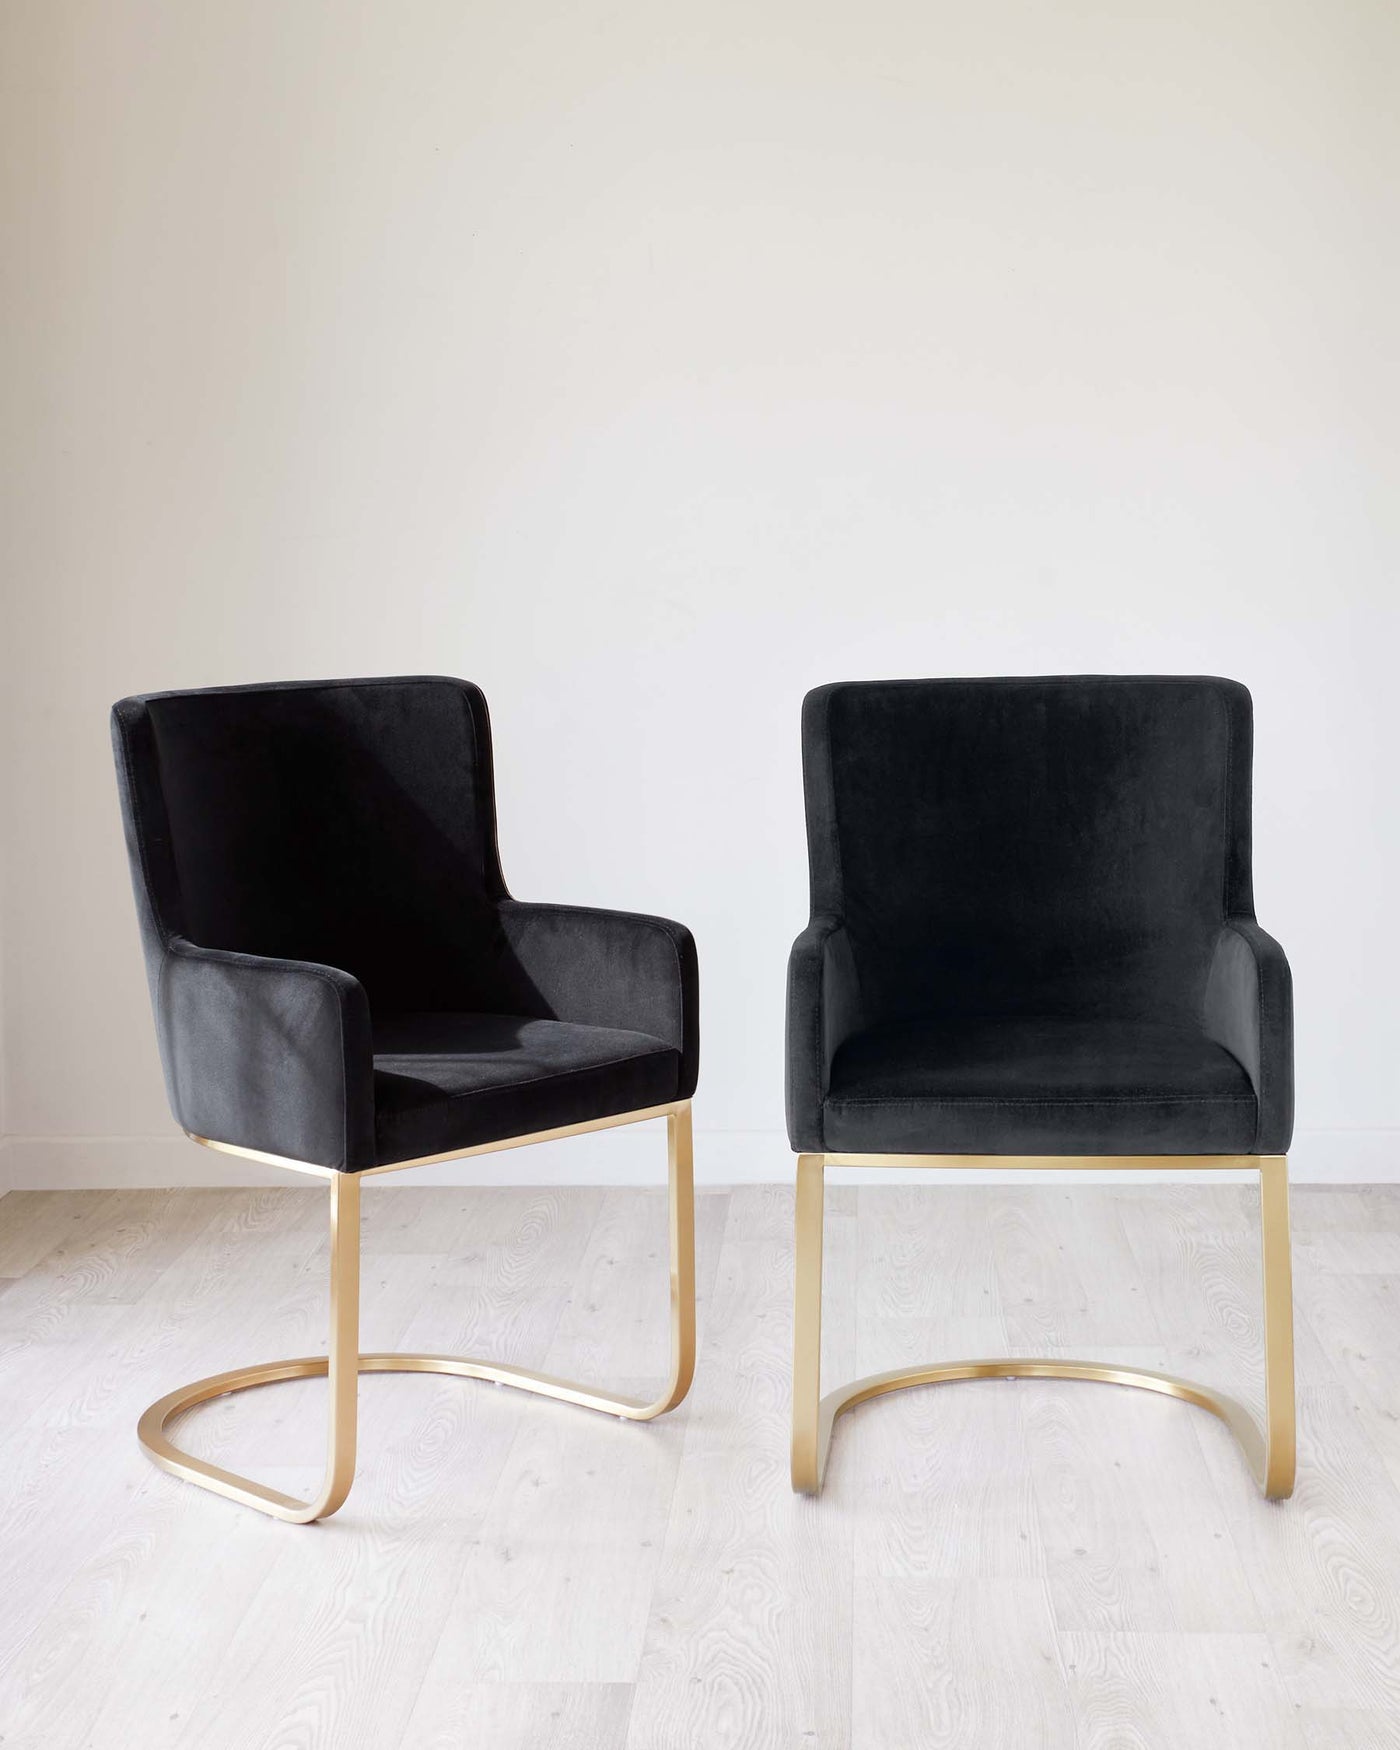 Two modern accent chairs with black velvet upholstery and sleek, gold-coloured metal legs, positioned against a white wall on a light wooden floor.